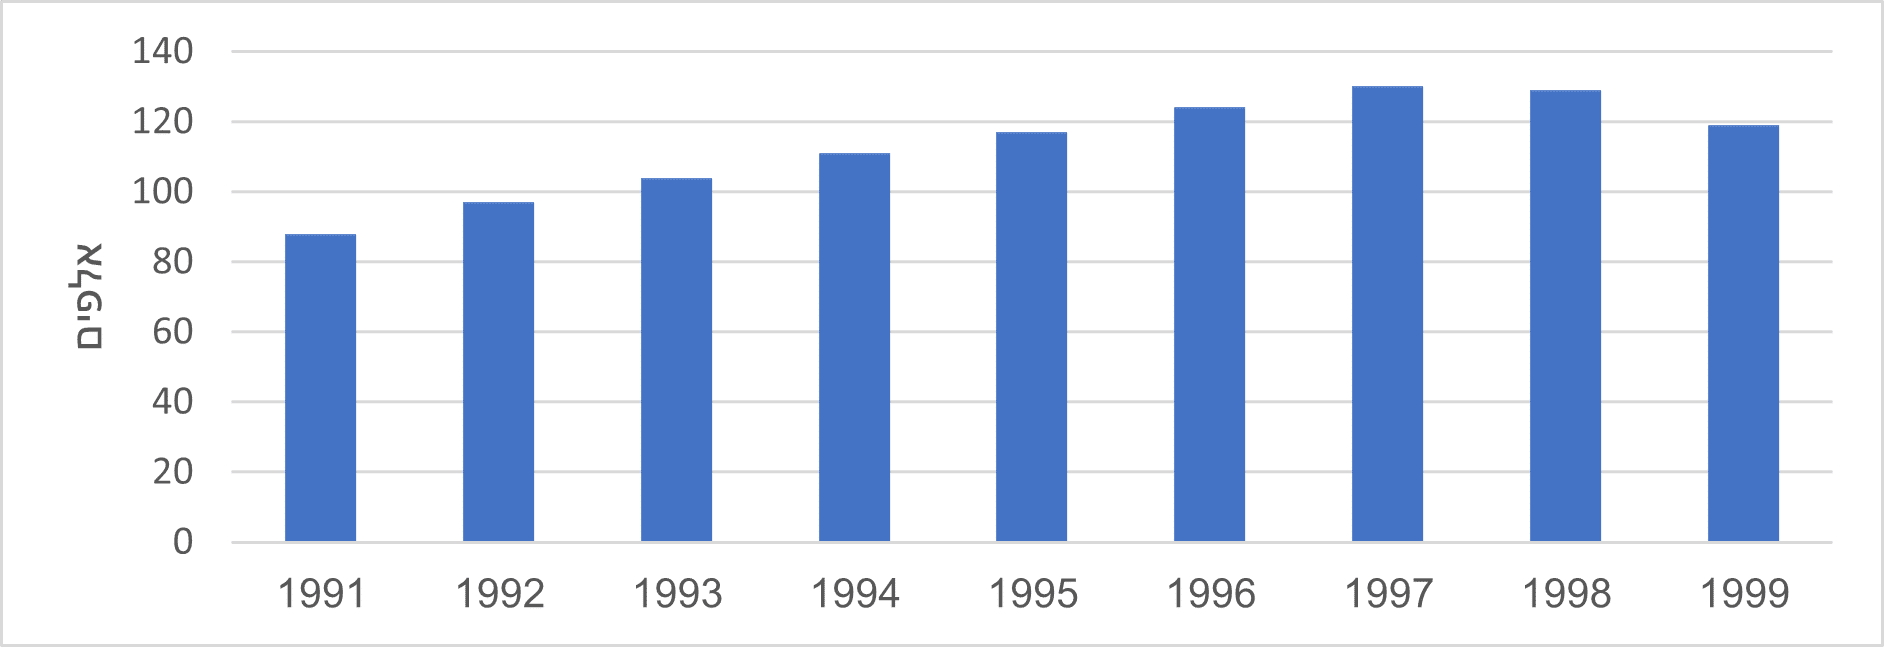 Graph 3: Population growth in Judea, Samaria, and the Gaza Strip, based on interpolation of years 1991–1999. Source: The UN, World Population Prospects: The 2012 Revision 